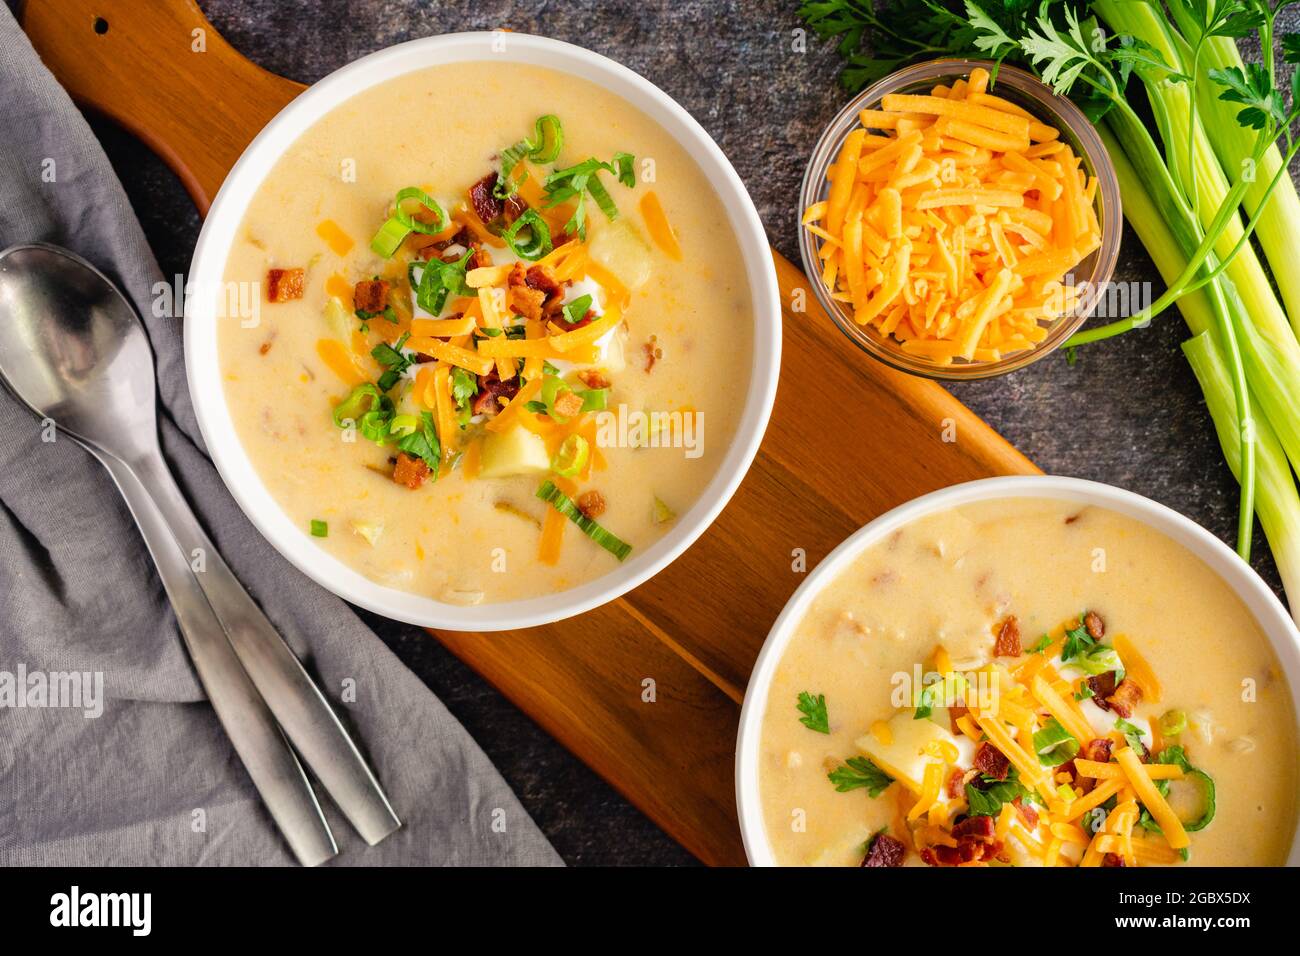 Bowls of Loaded Baked Potato Soup Topped with Sour Cream, Cheddar Cheese, Bacon, and Chives: Creamy potato soup garnished with sour cream, shredded ch Stock Photo